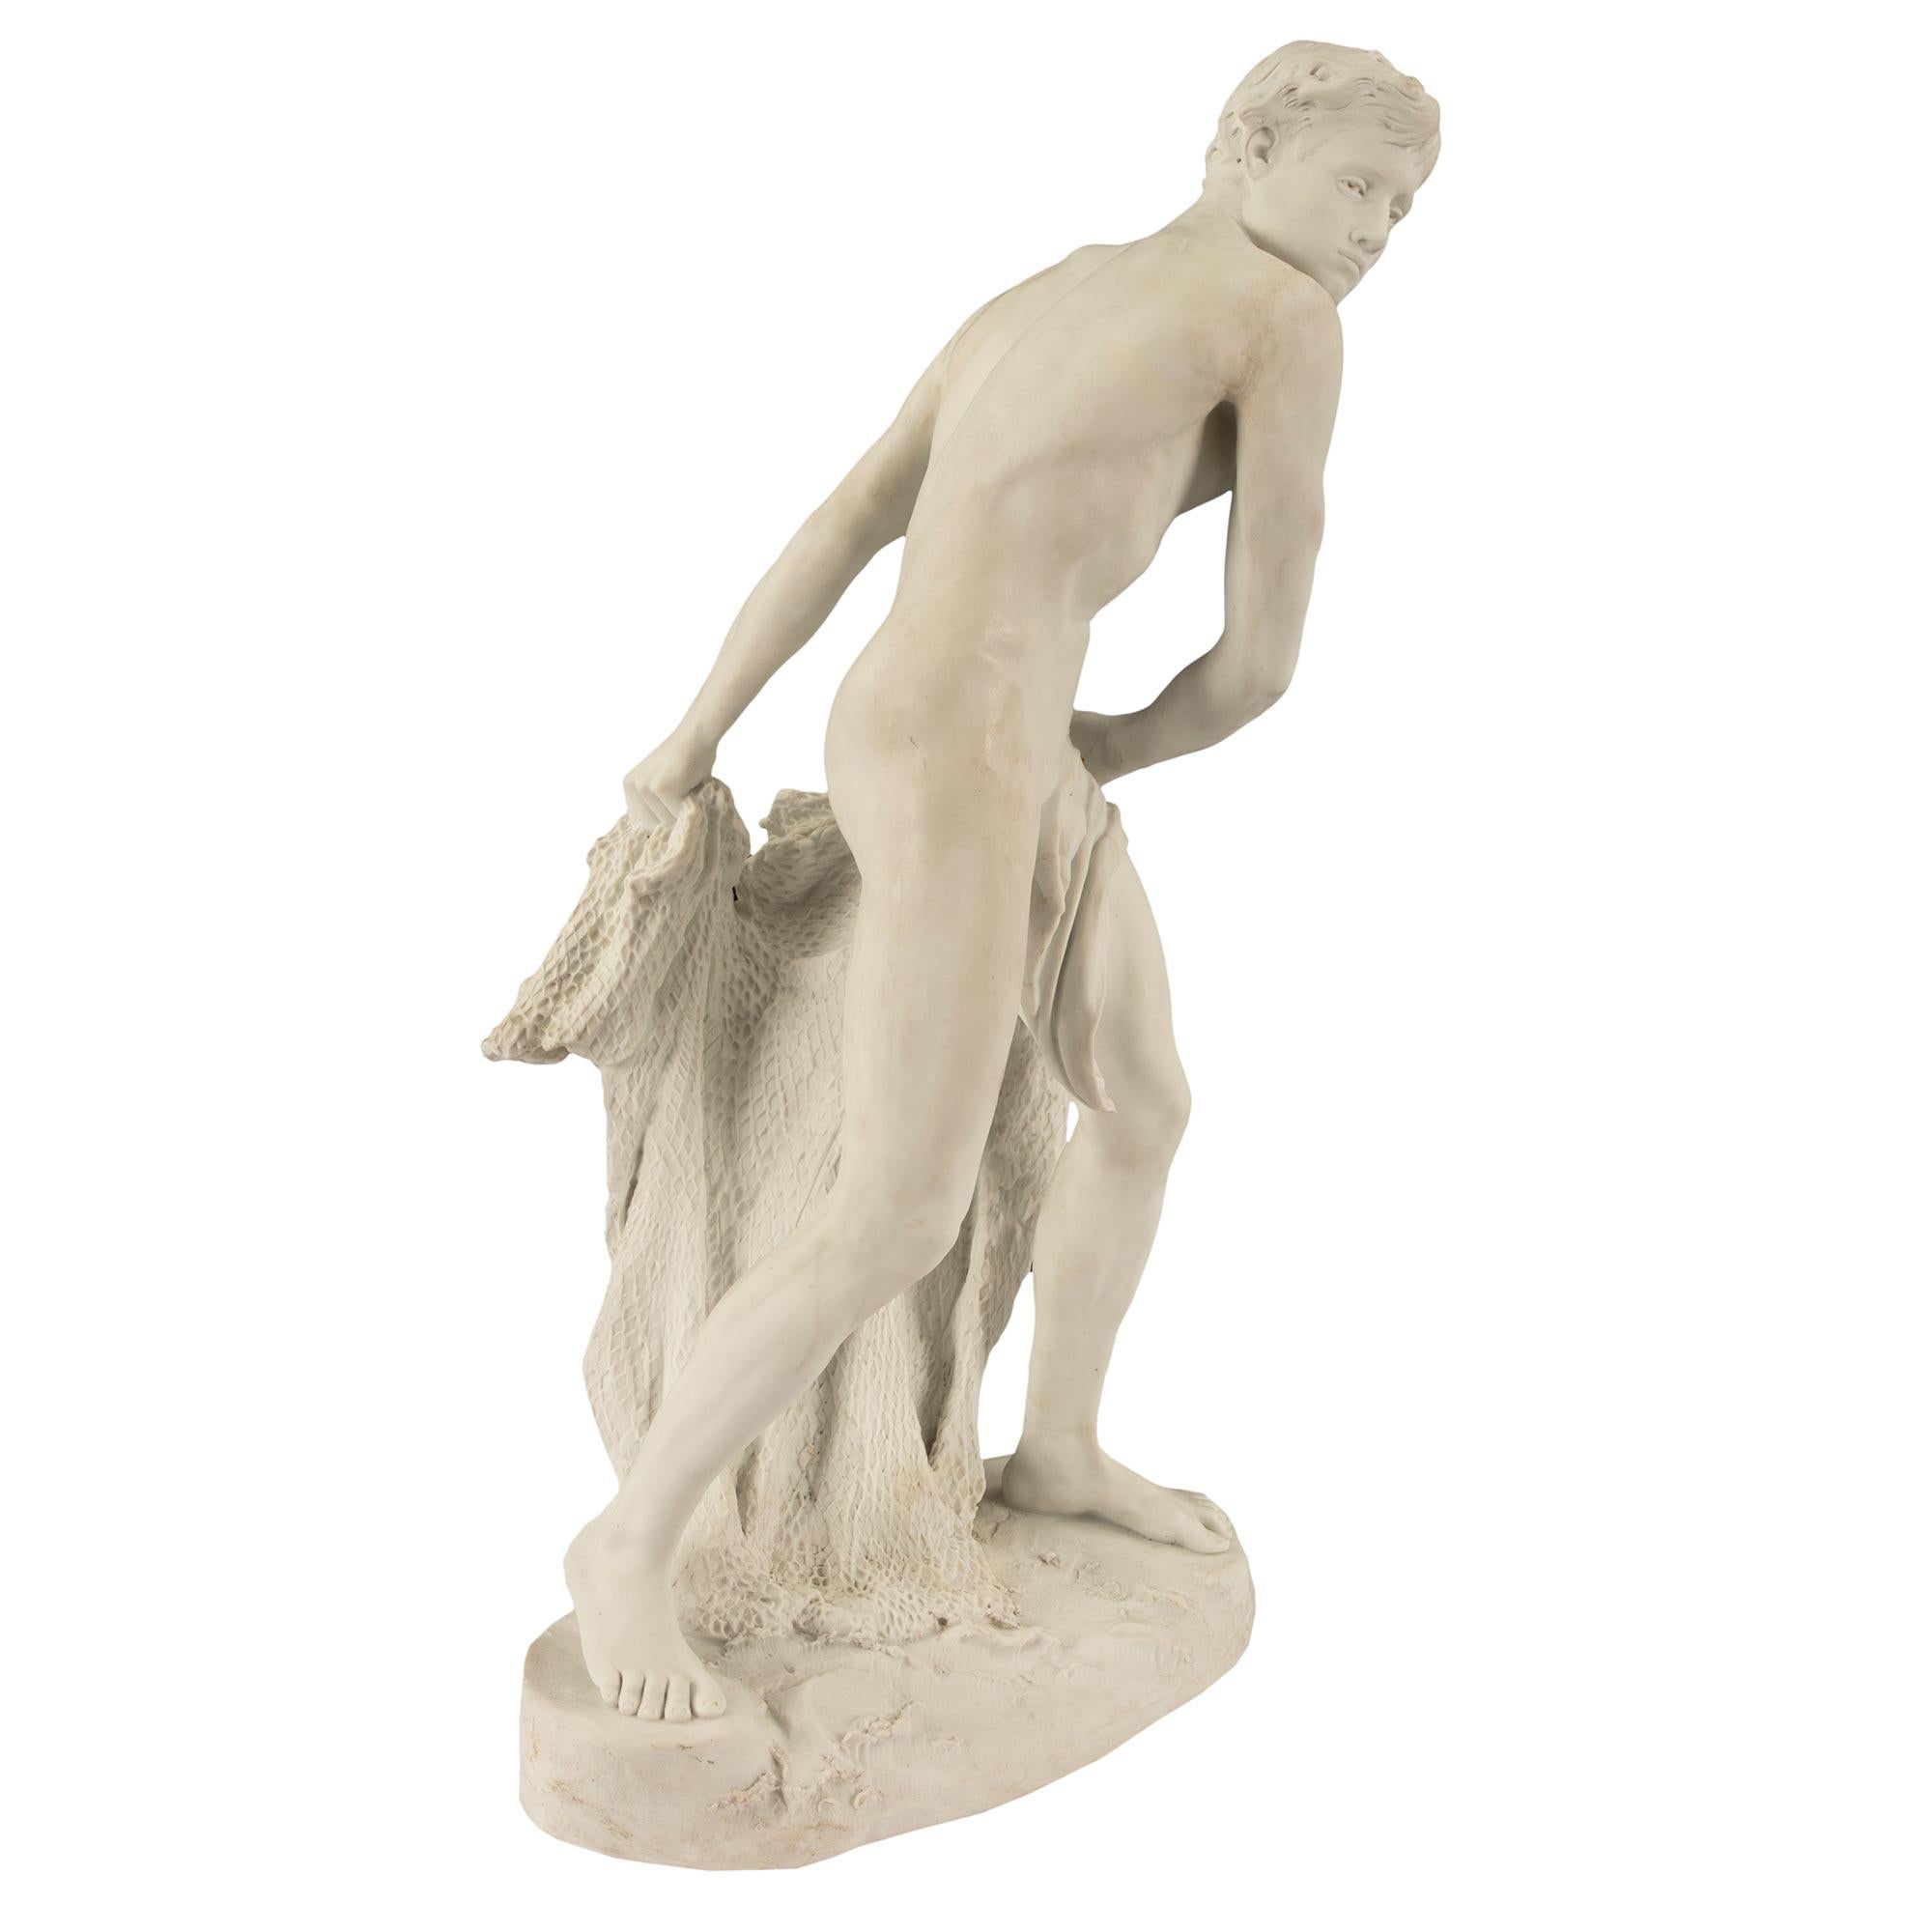 A handsome French 19th century Louis XVI st. Biscuit de Sèvres porcelain statue of a fisher boy. The statue is raised by an oblong terrain design base with small waves. The fisher boy is draped in a flowing fabric and holds his finely detailed and